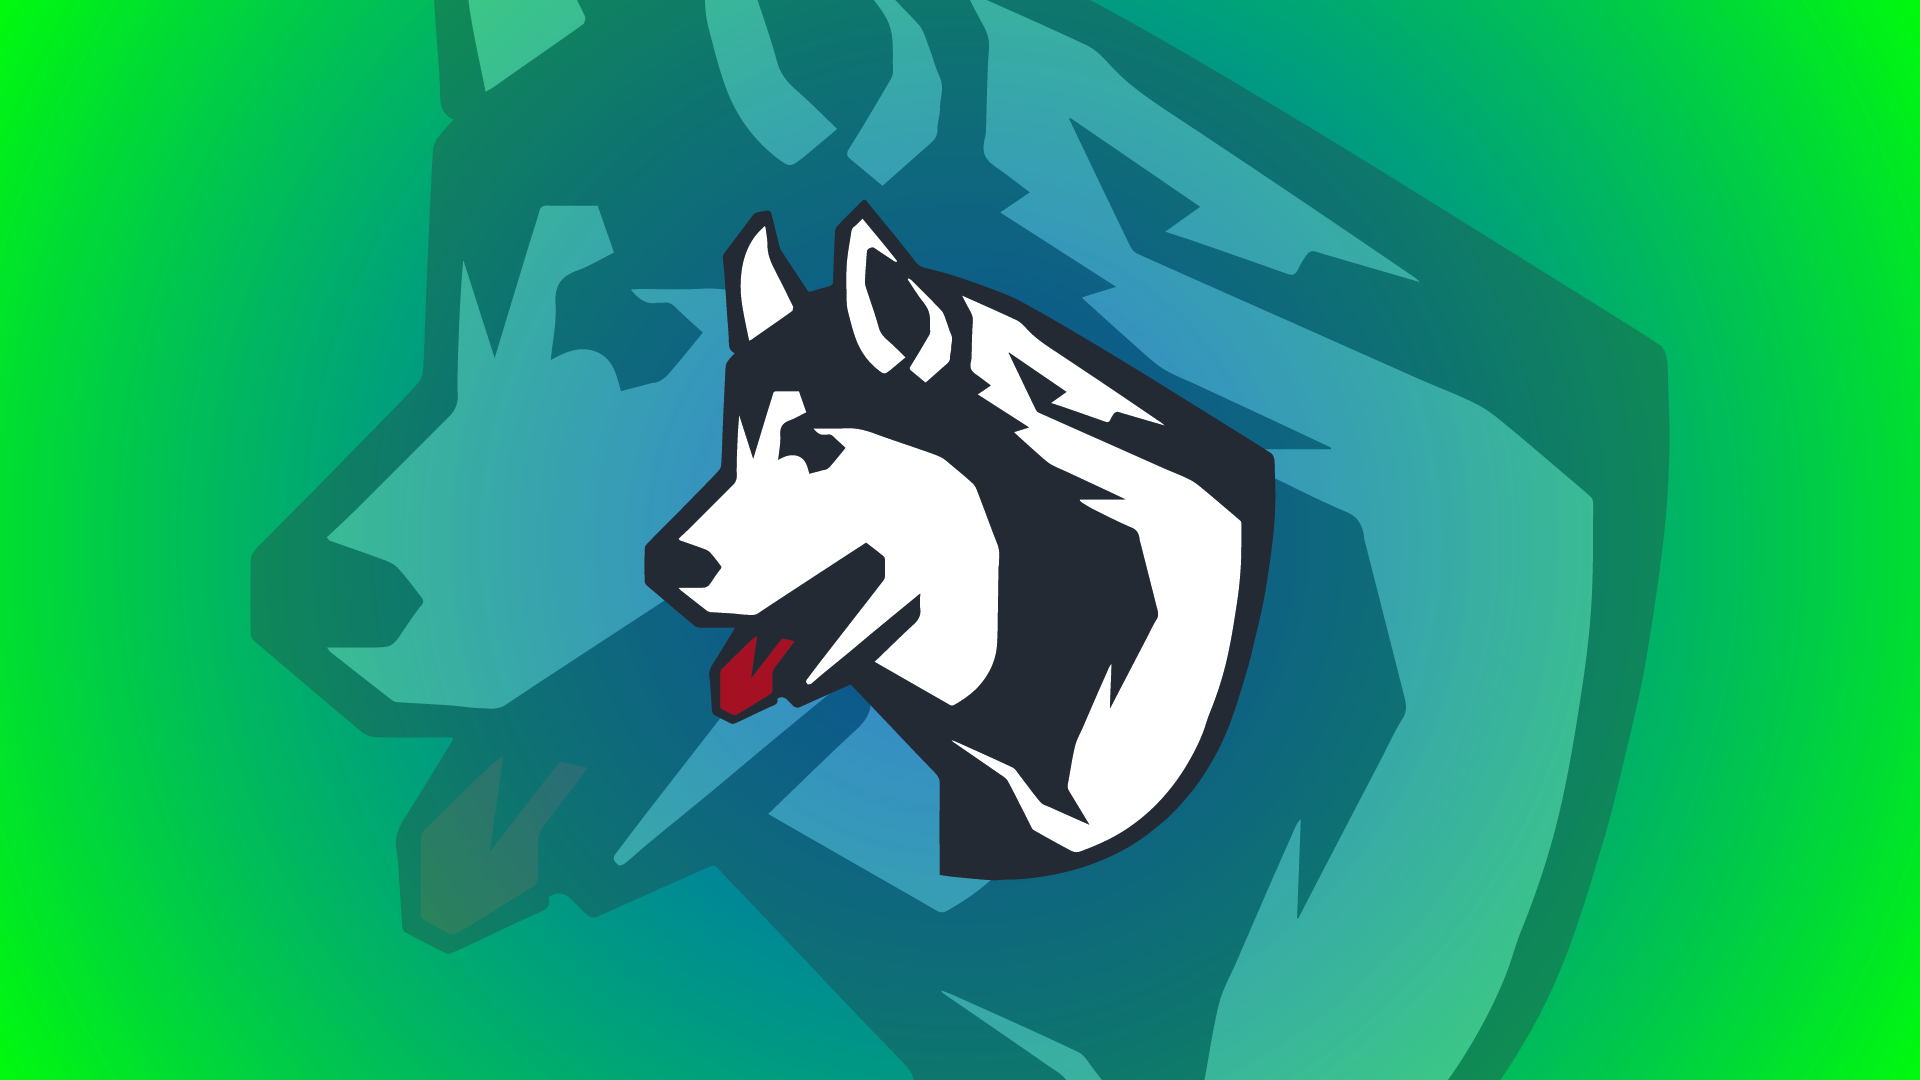 Husky logo times two on a blue to green gradient background.